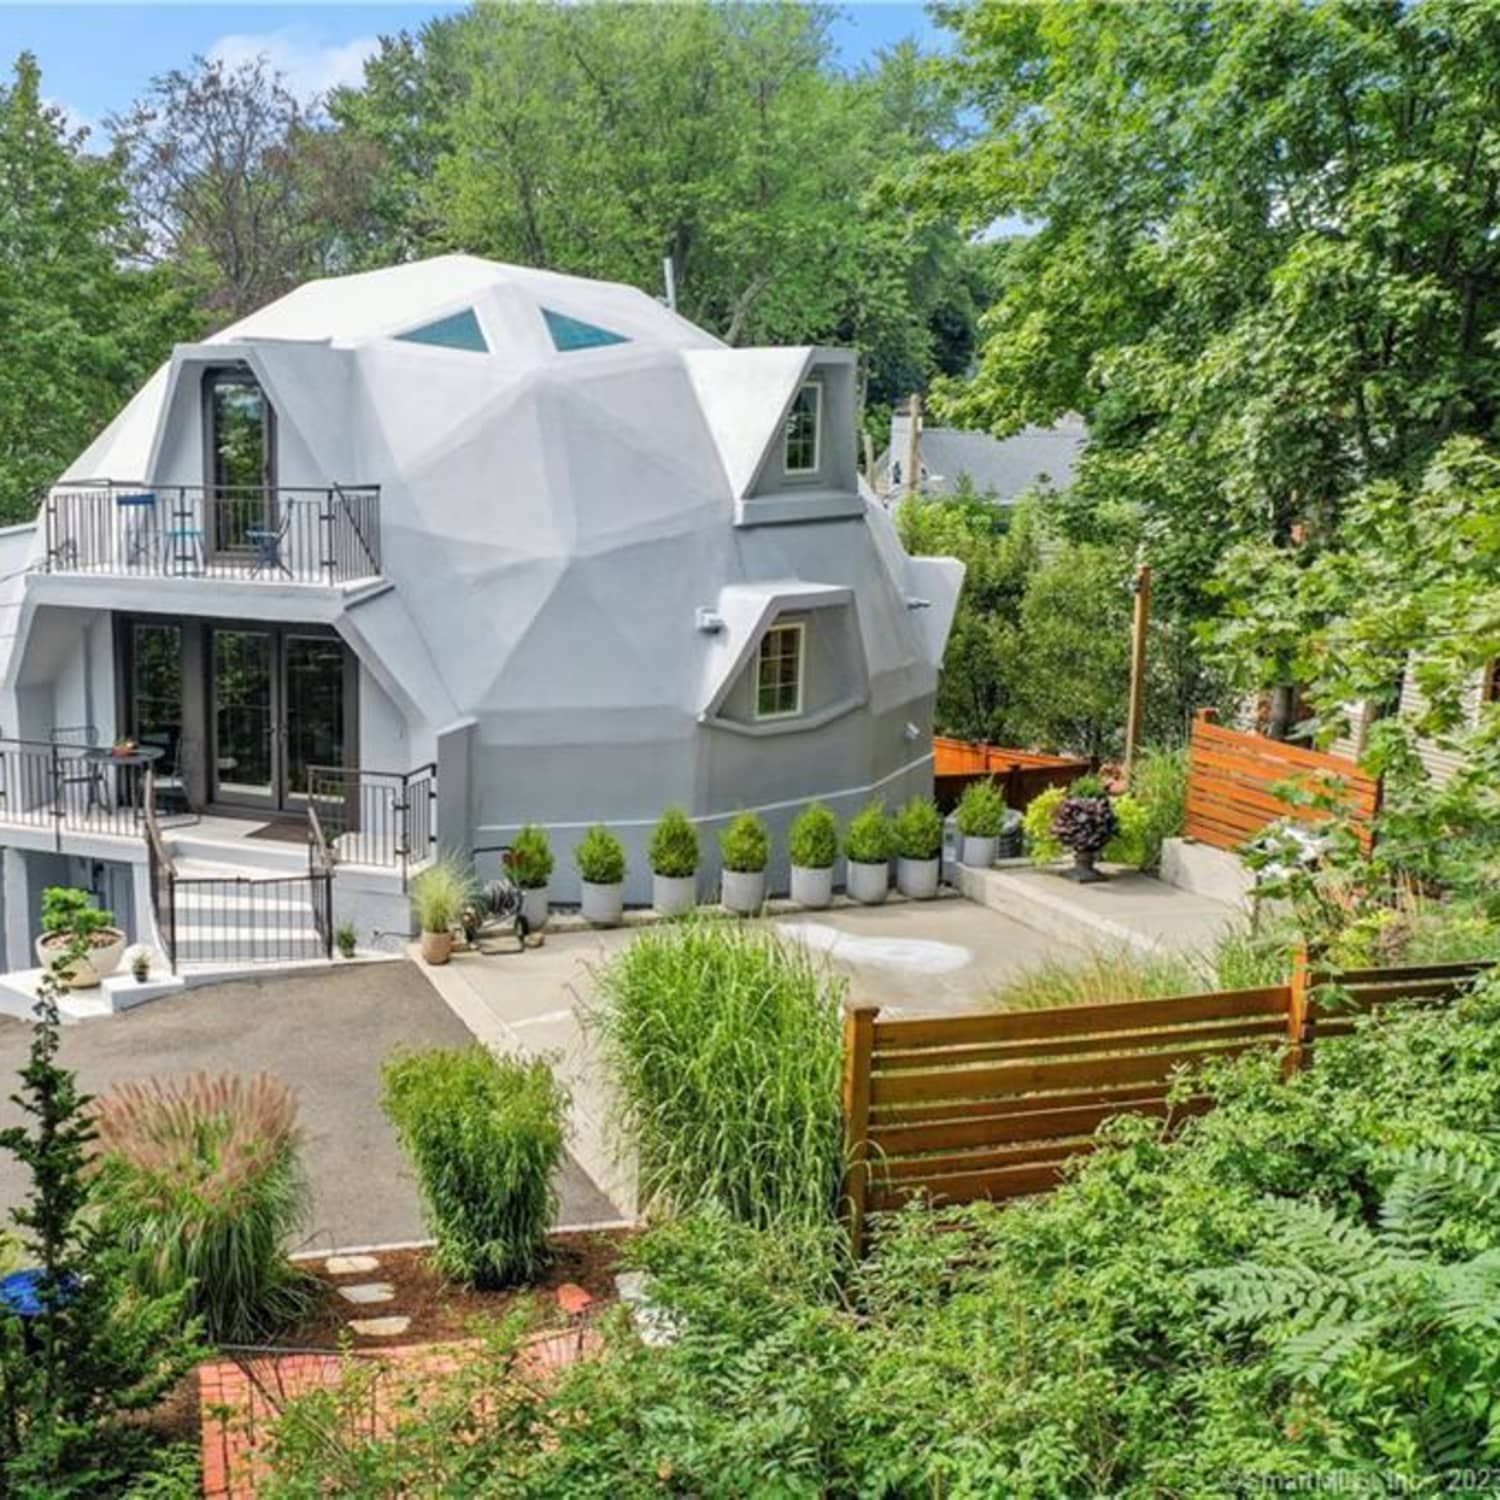 https://cdn.apartmenttherapy.info/image/upload/f_jpg,q_auto:eco,c_fill,g_auto,w_1500,ar_1:1/at%2Freal-estate%2F2023-09%2Fgeodesic-dome-home%2Fgeodesic-dome-home-exterior-3